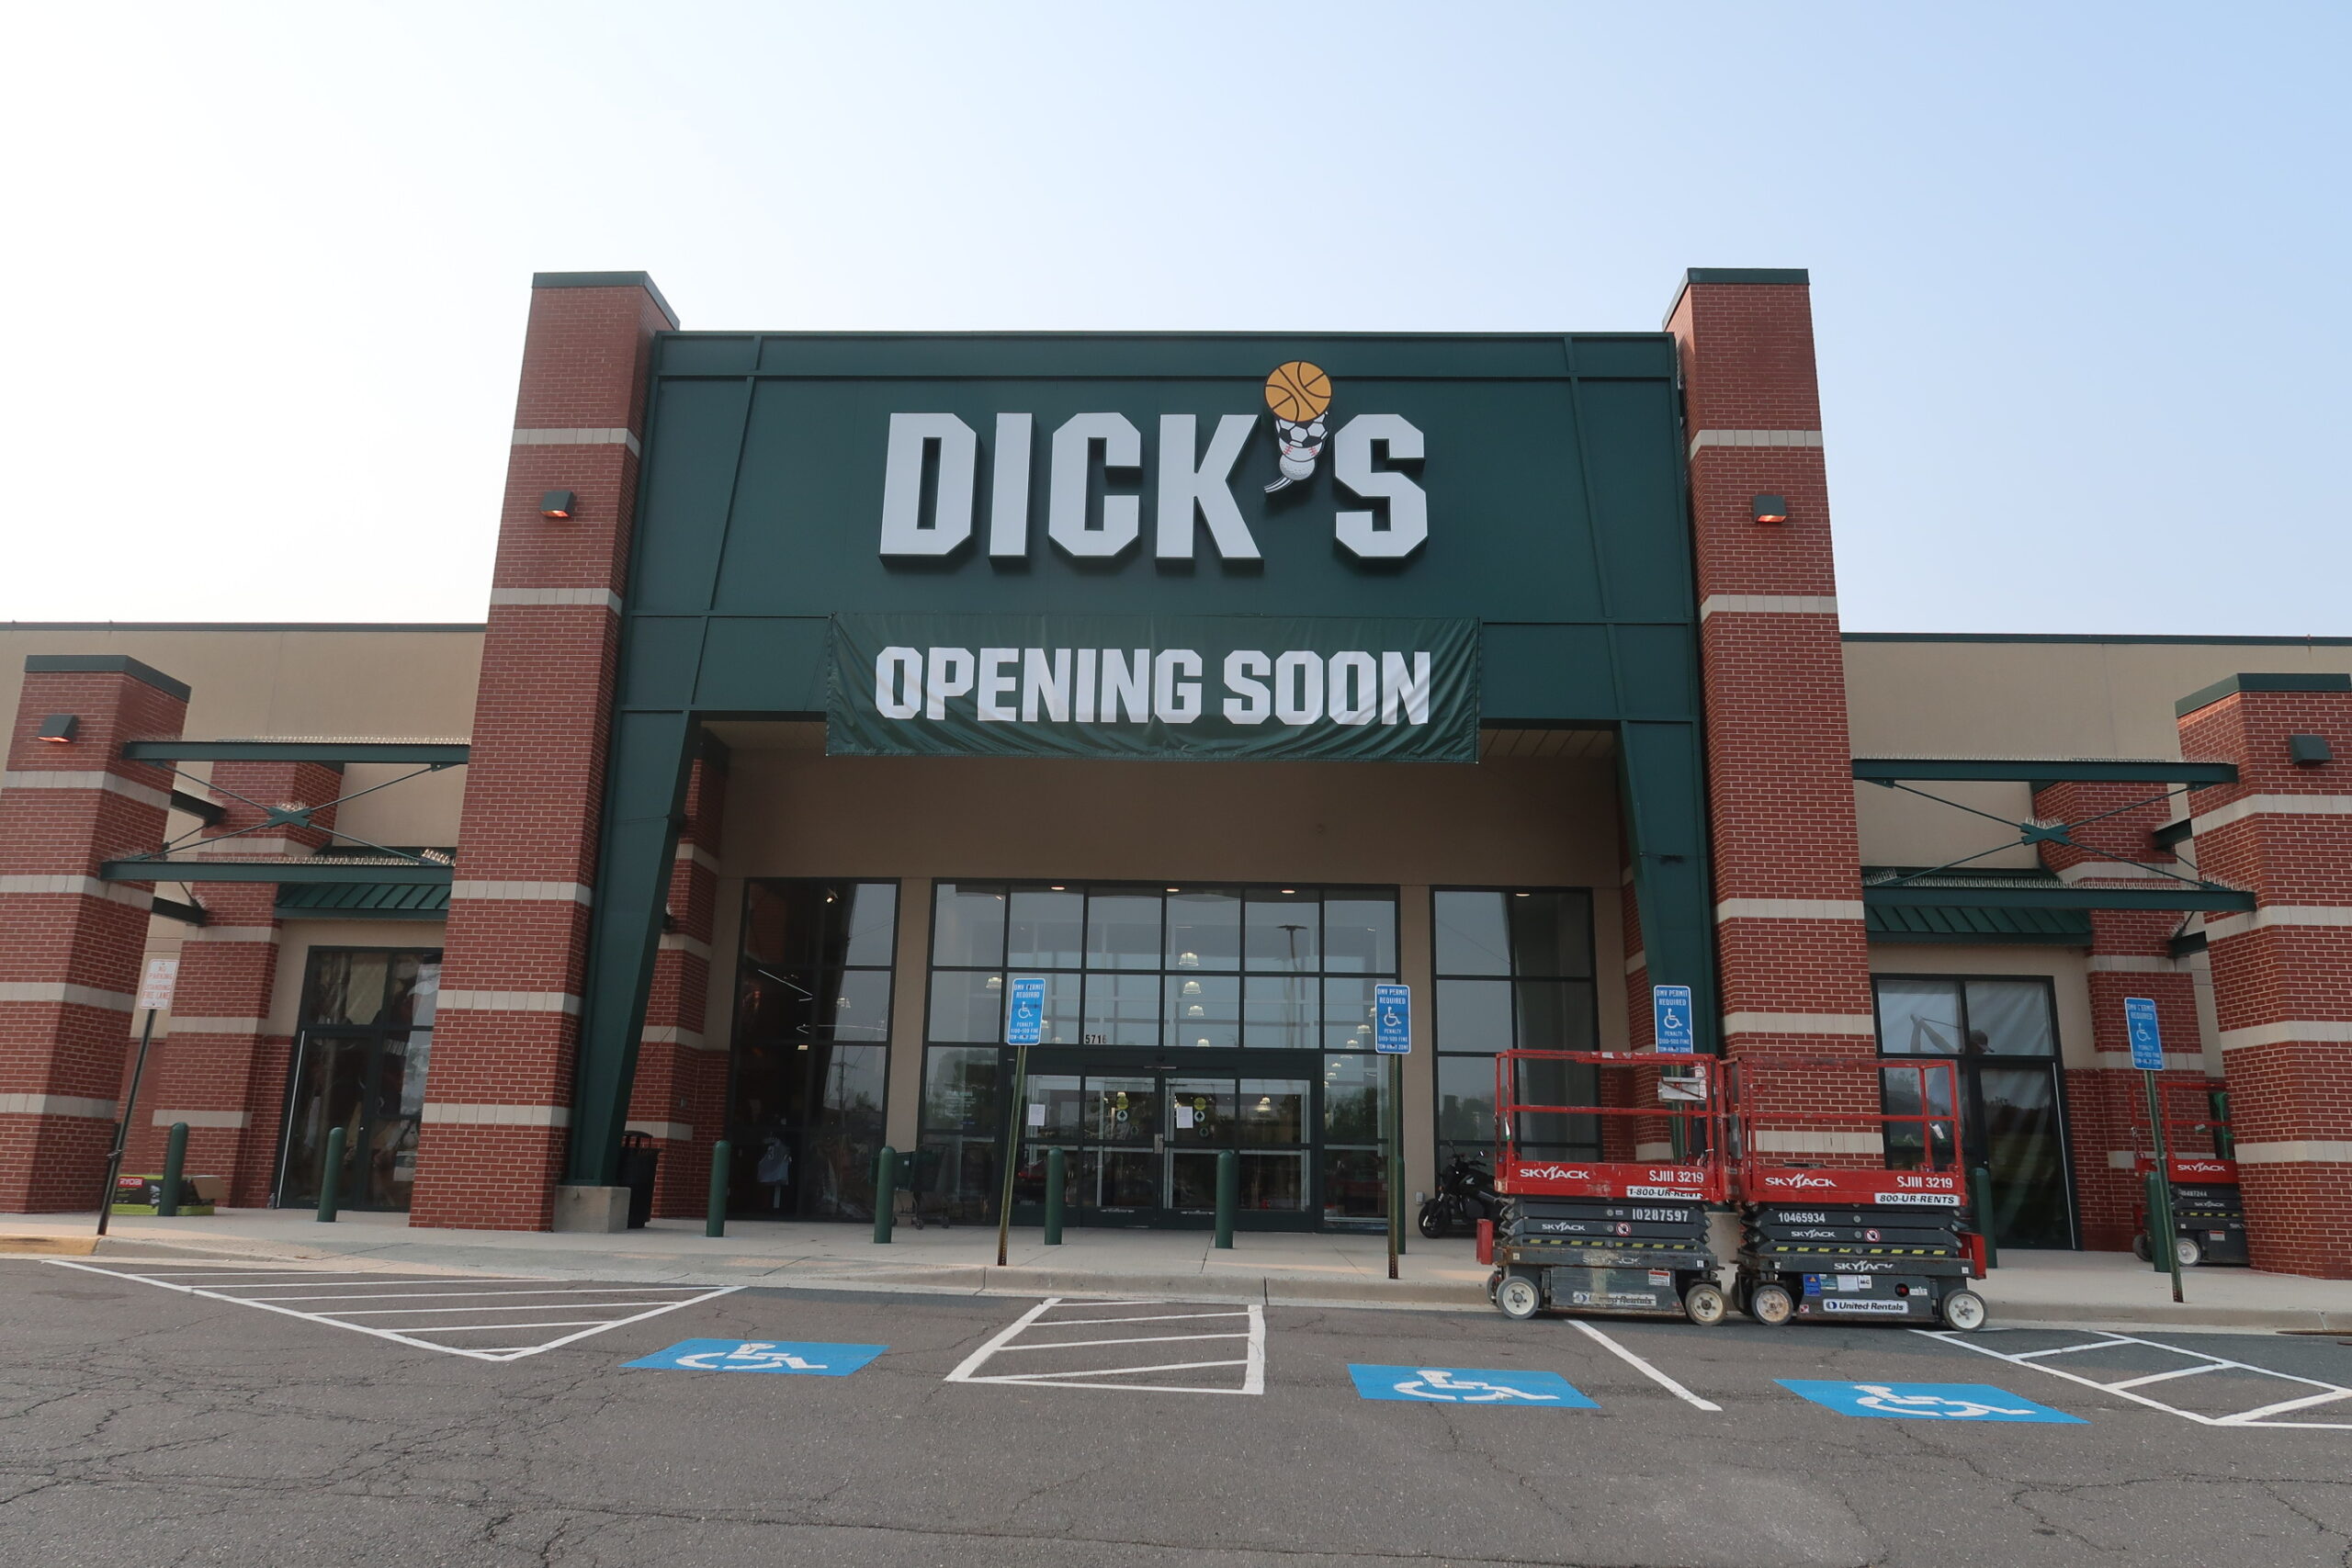 Dick's Sporting Goods reopens this week